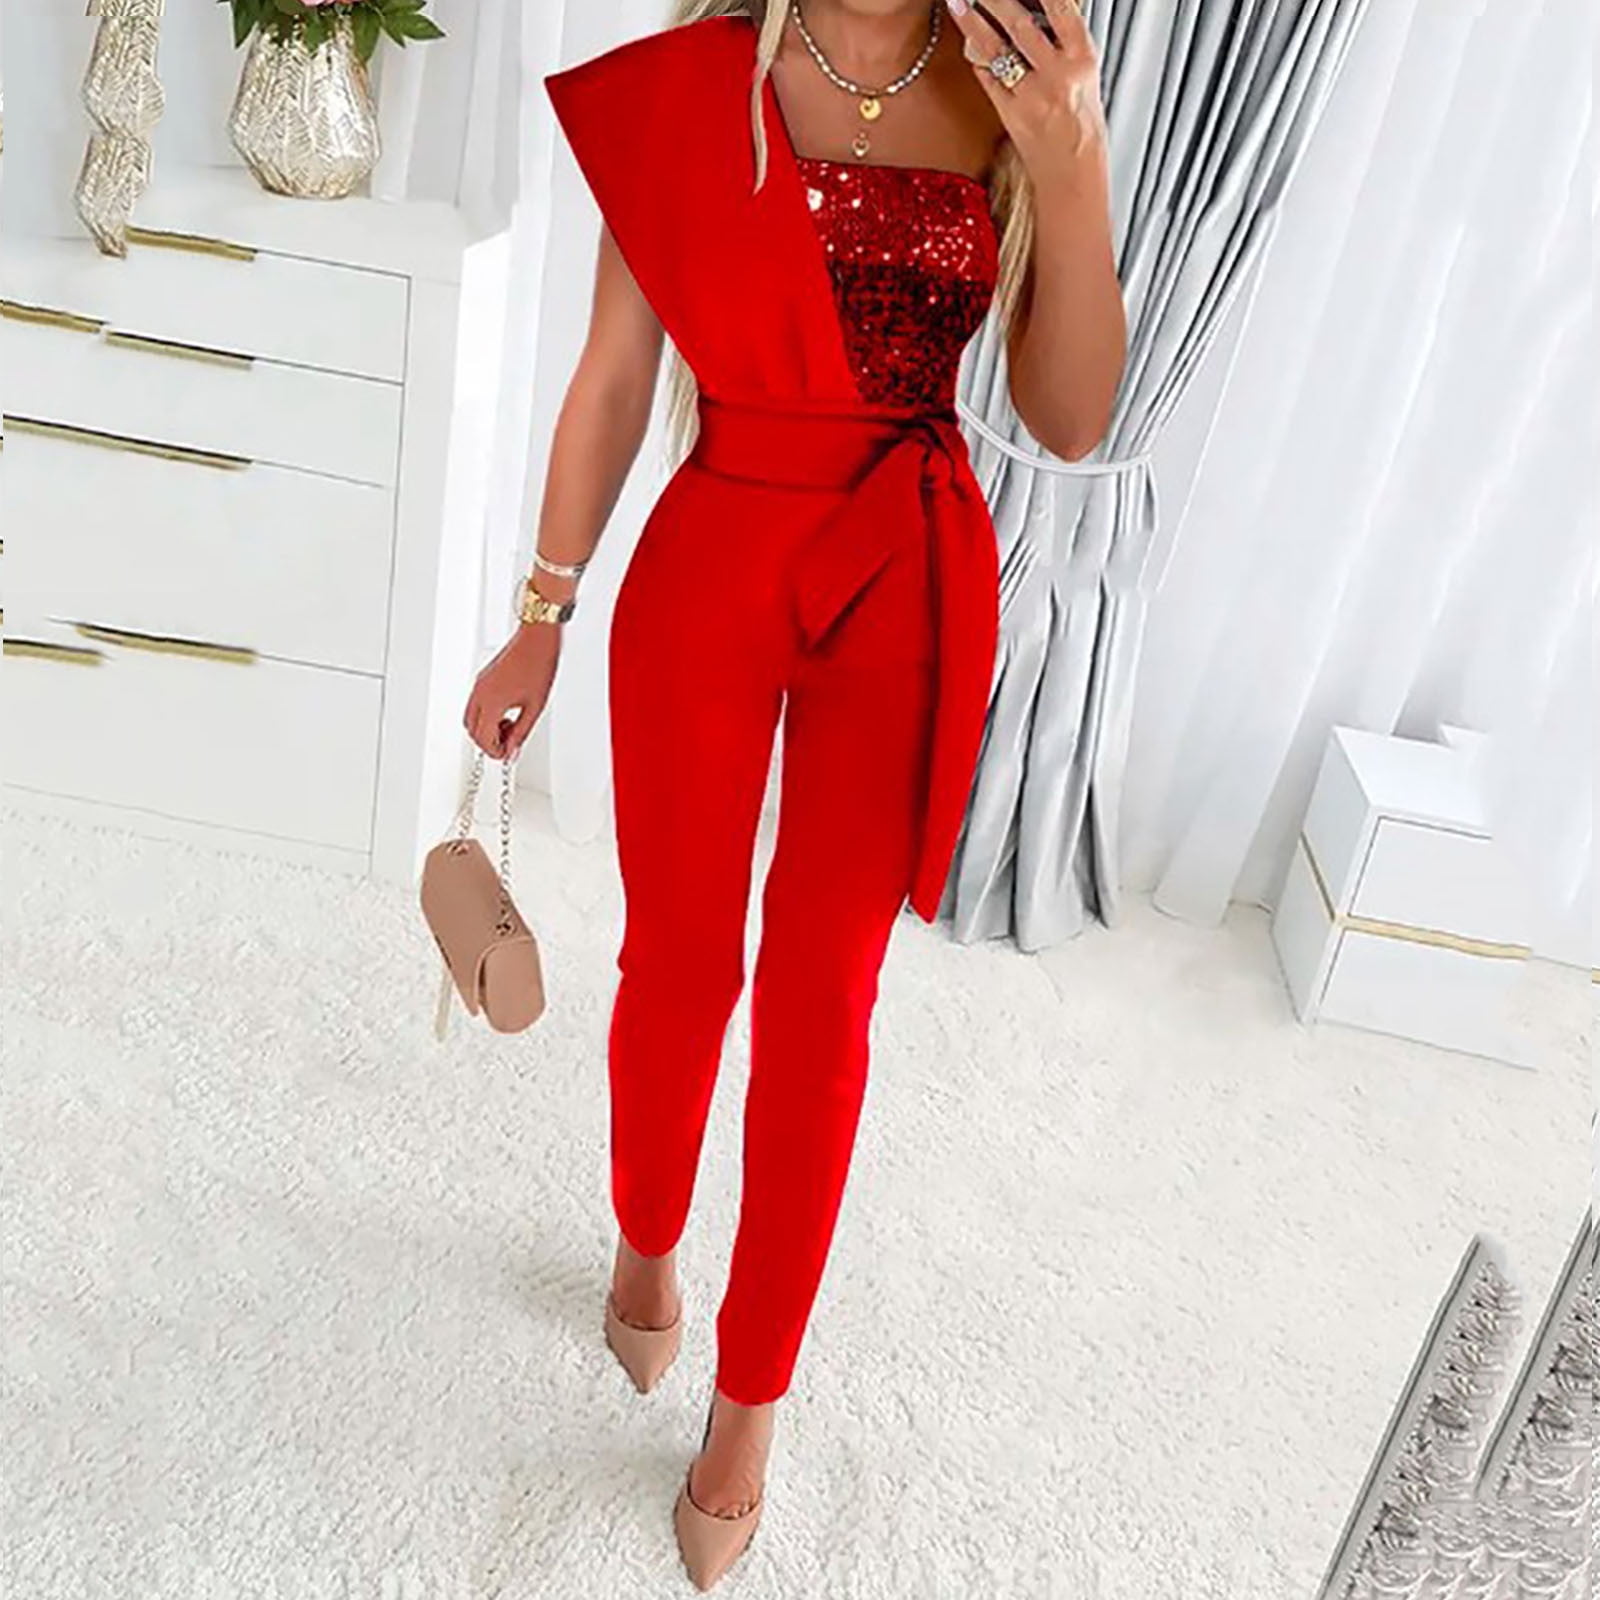 Aueoeo Petite Jumpsuits For Women, Women's Summer Casual, 40% OFF